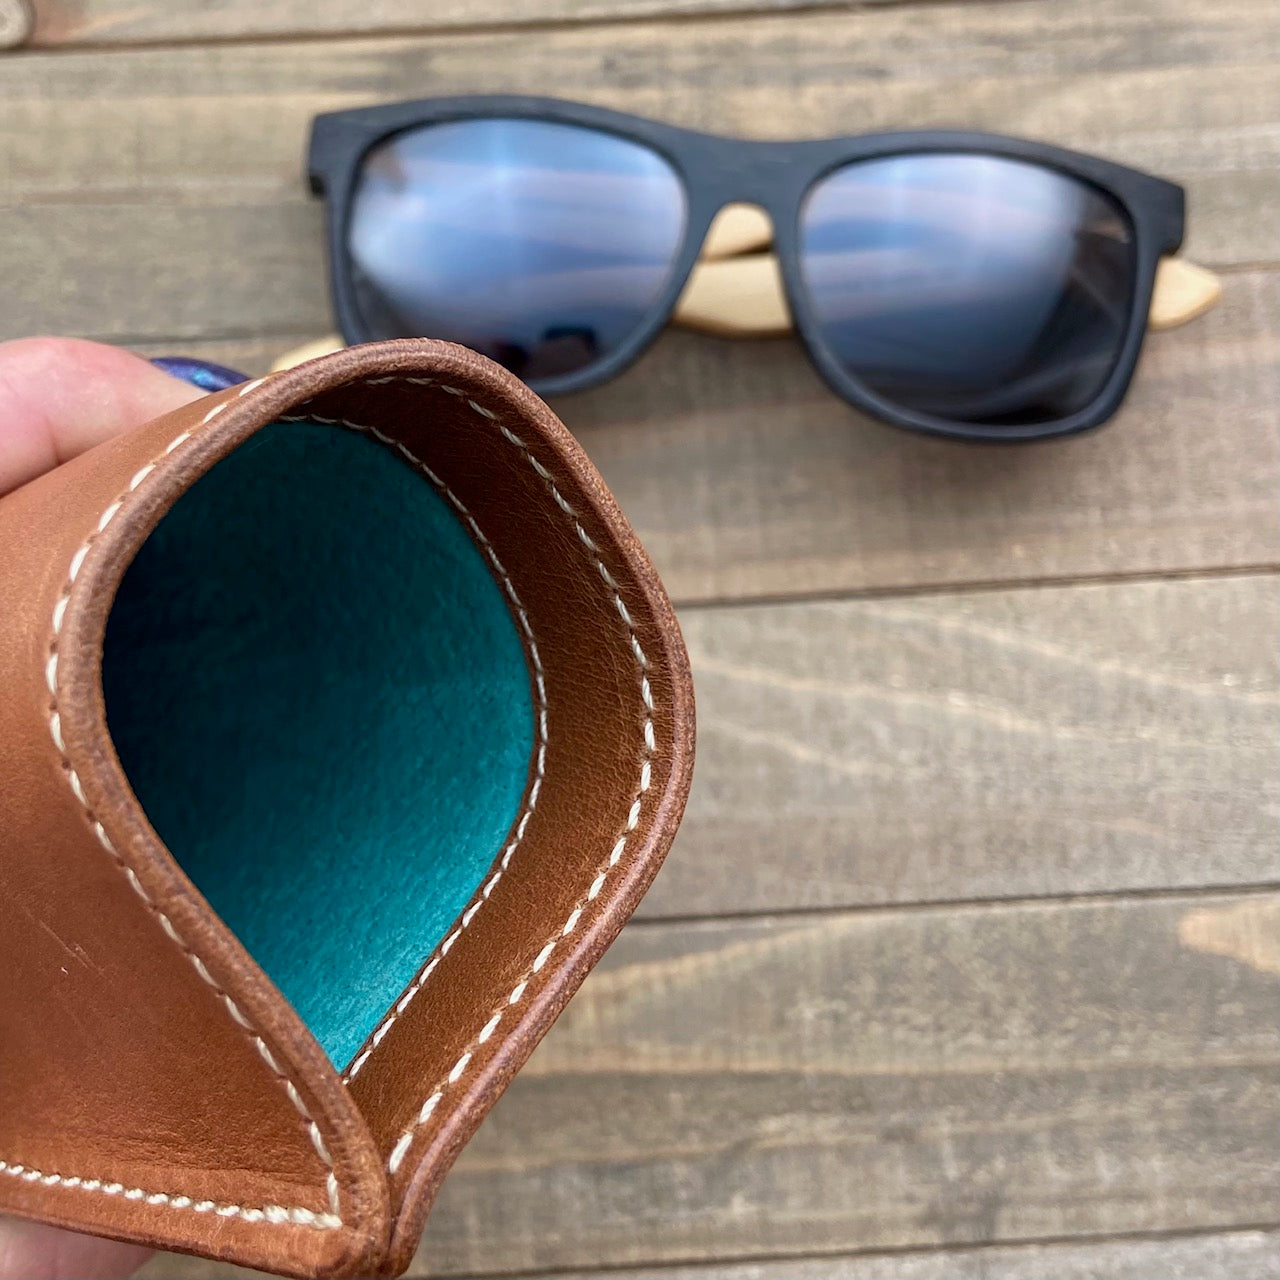 Saddle Heritage Sunglasses Case, Lined in Suede